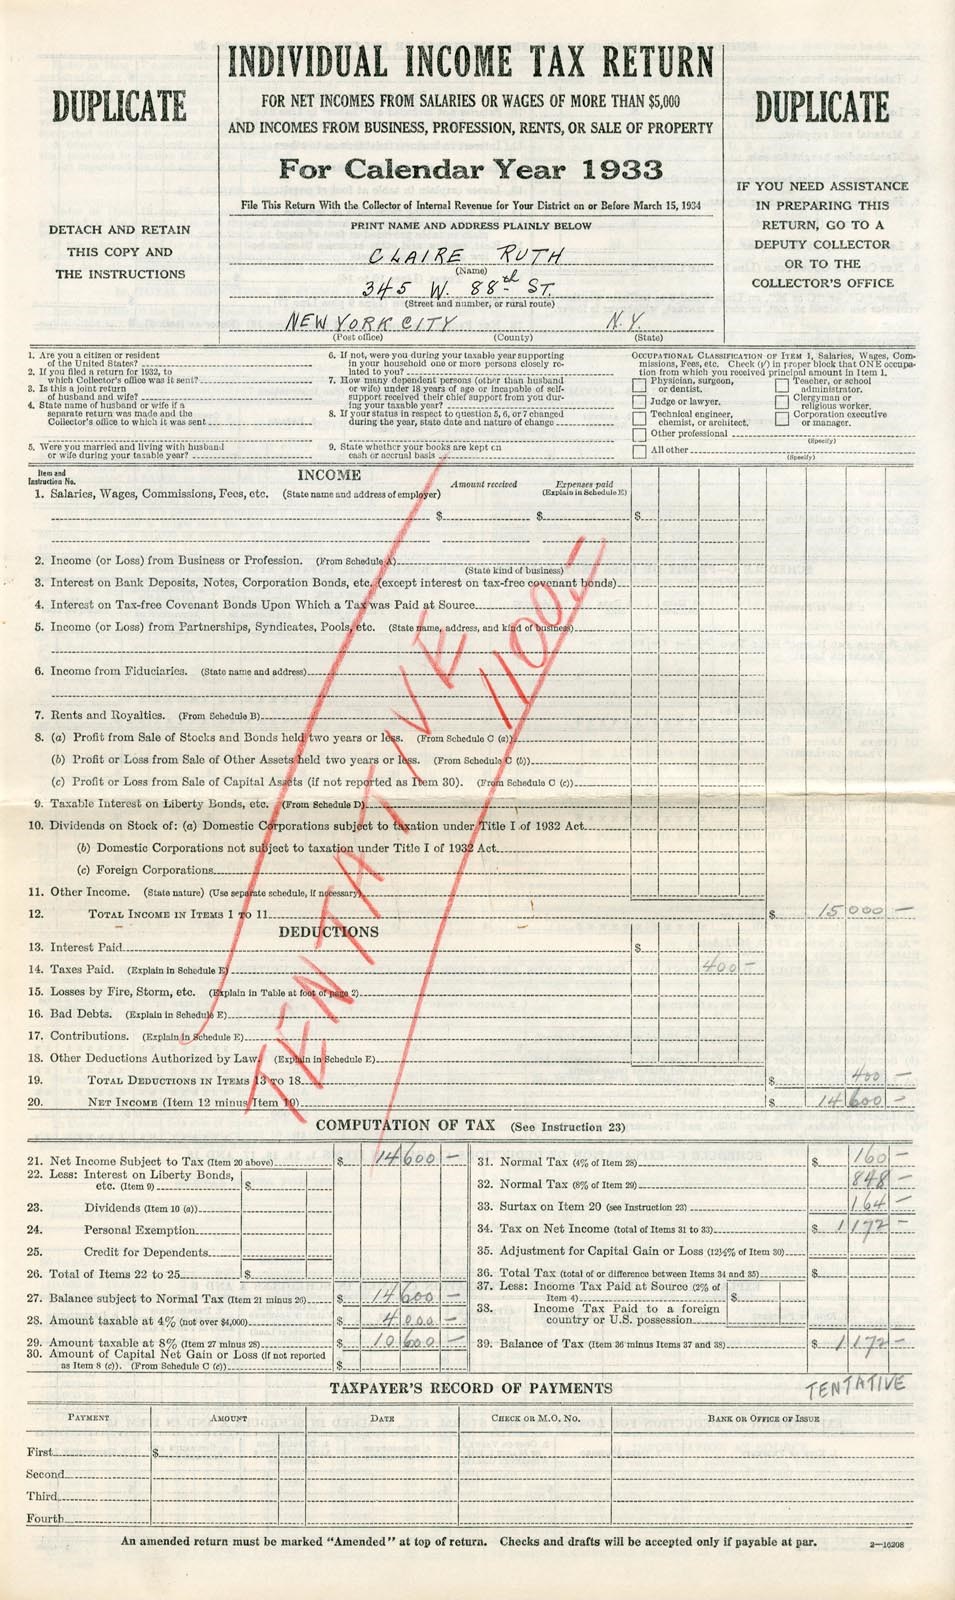 - 1933 Babe Ruth's Wife Claire Ruth "Tentative" Income Tax Return